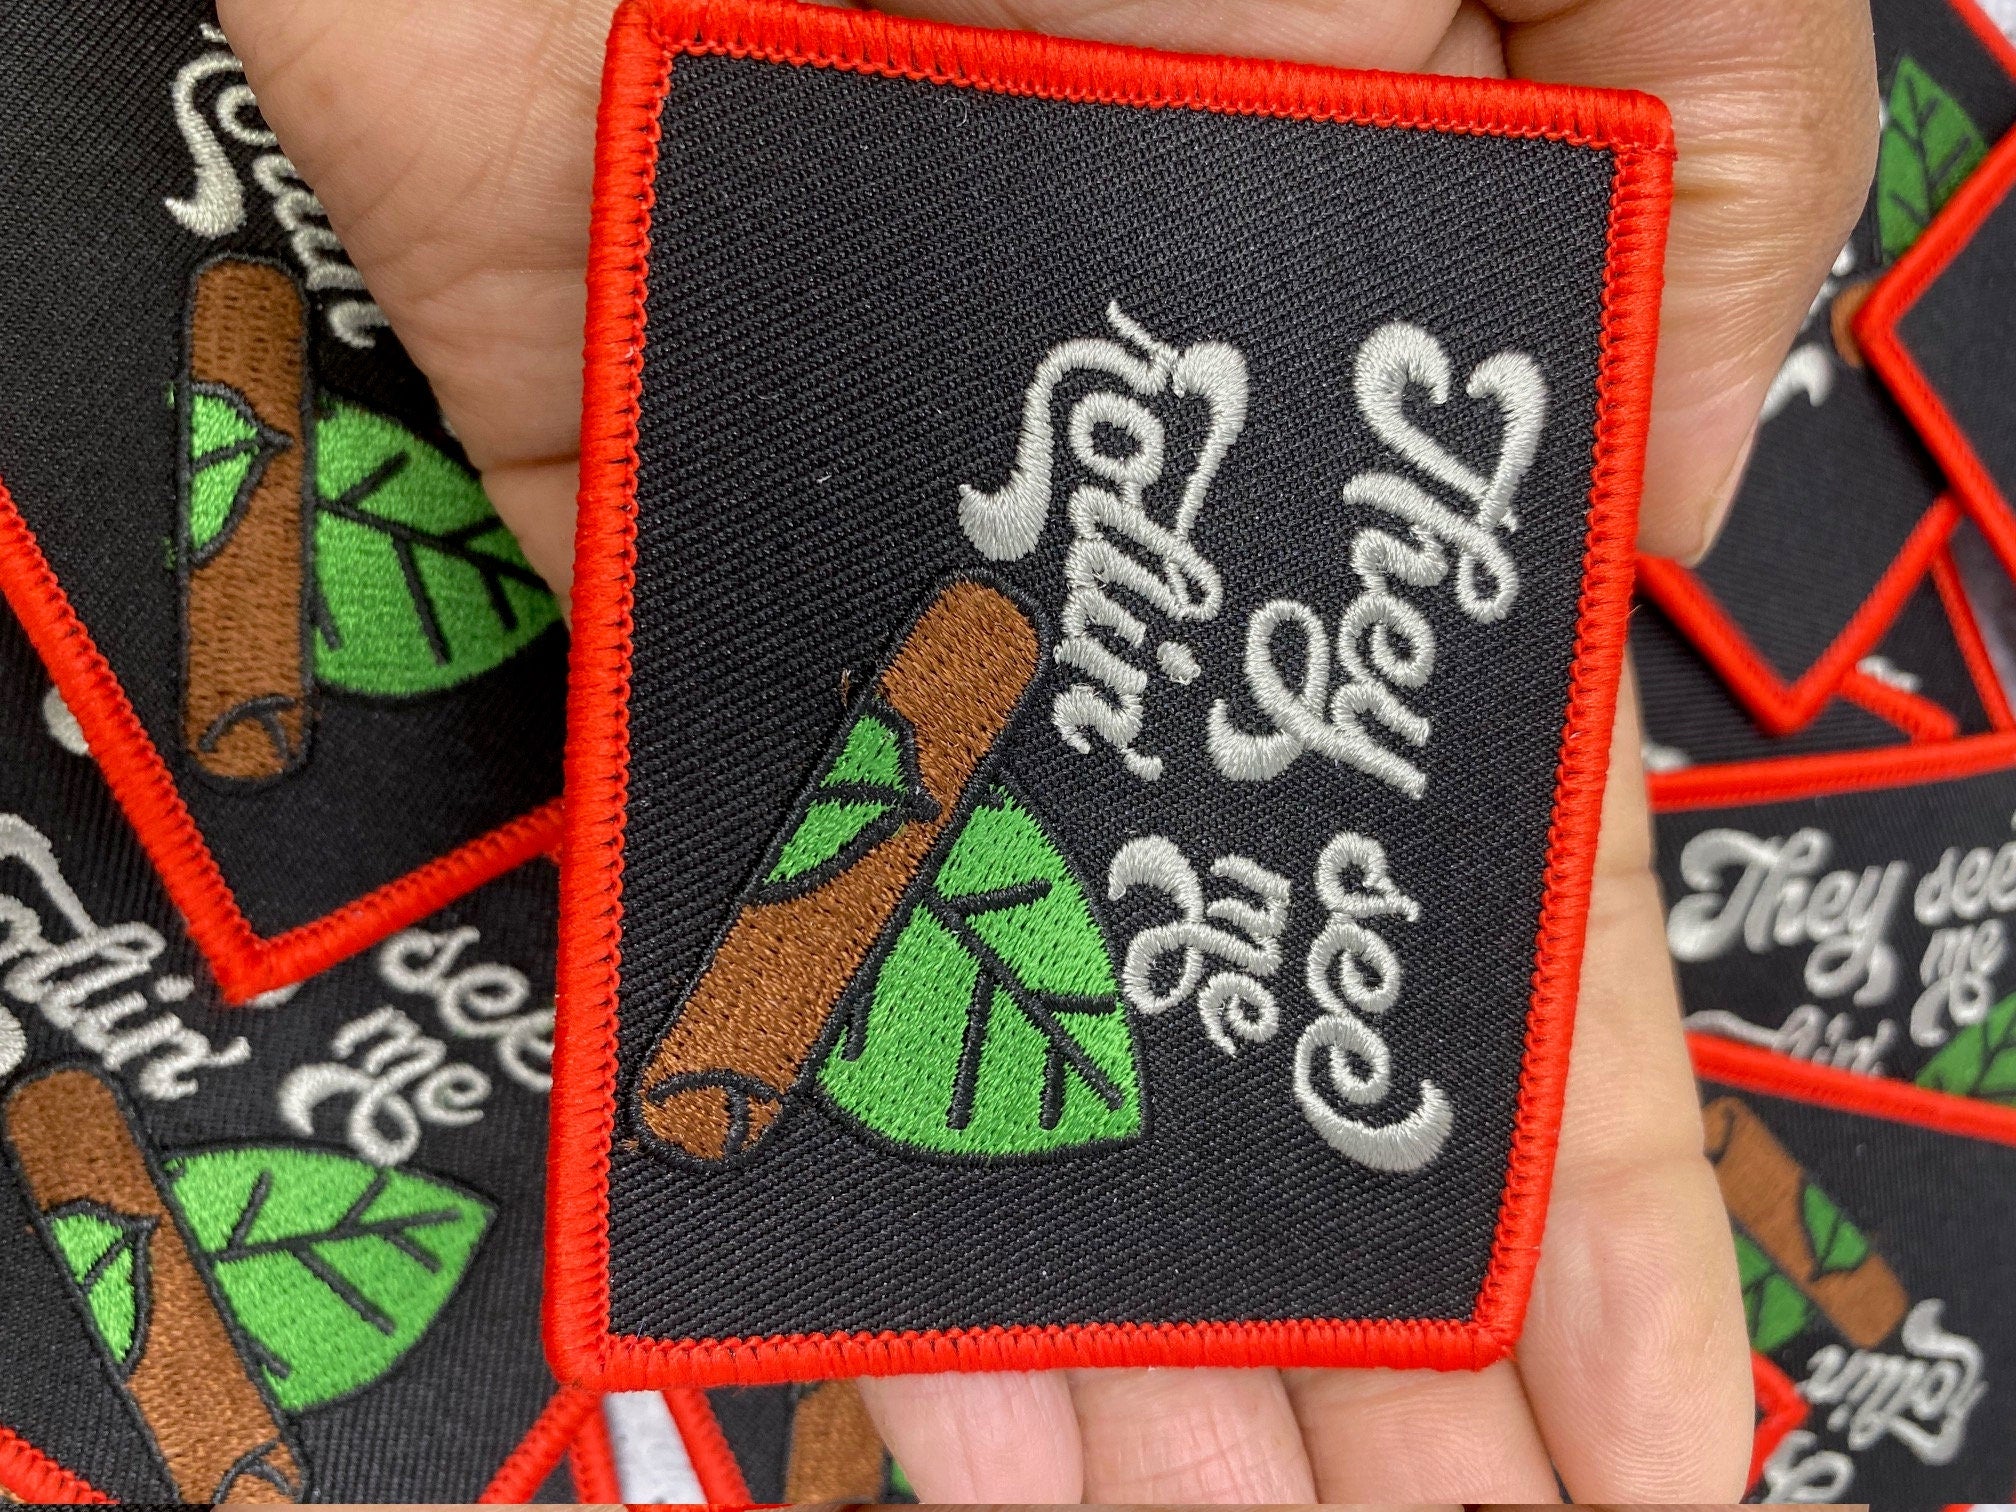 Cigar Lovers,"They See Me Rolling" 1-pc, Smokers Gift, Cool Embroidered Patch, Size 3',  Iron-on, Patches for Men